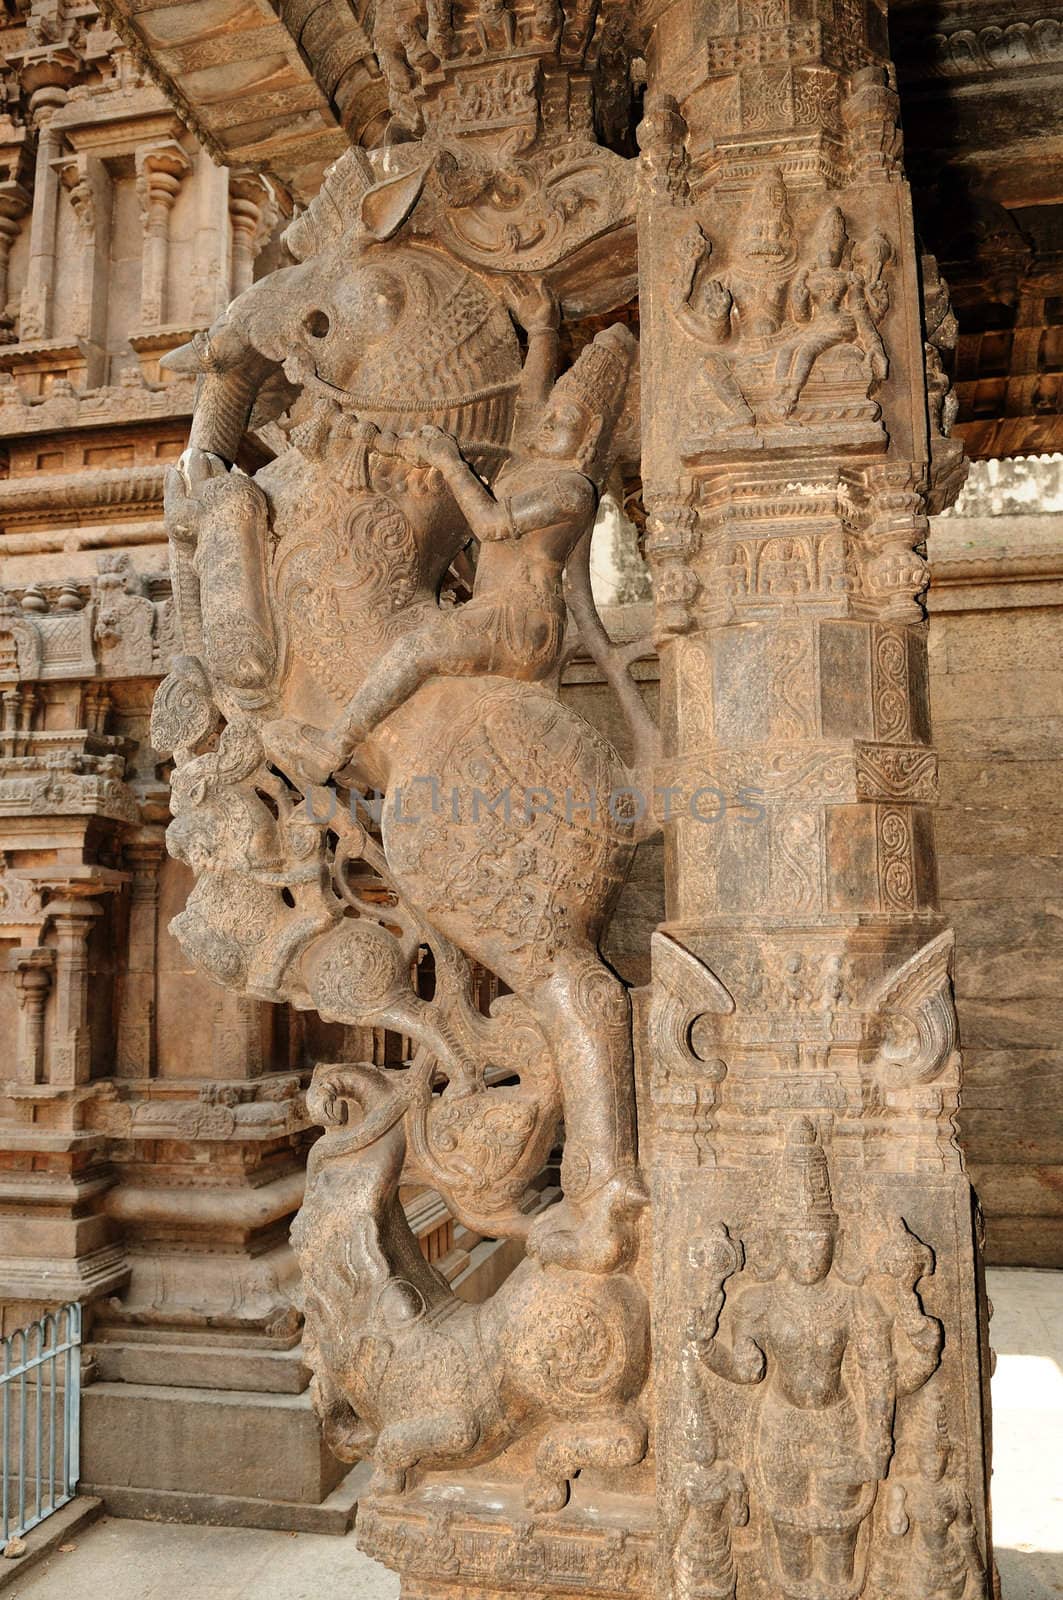 An ancient temple in Southern india displaying magnificient architecture